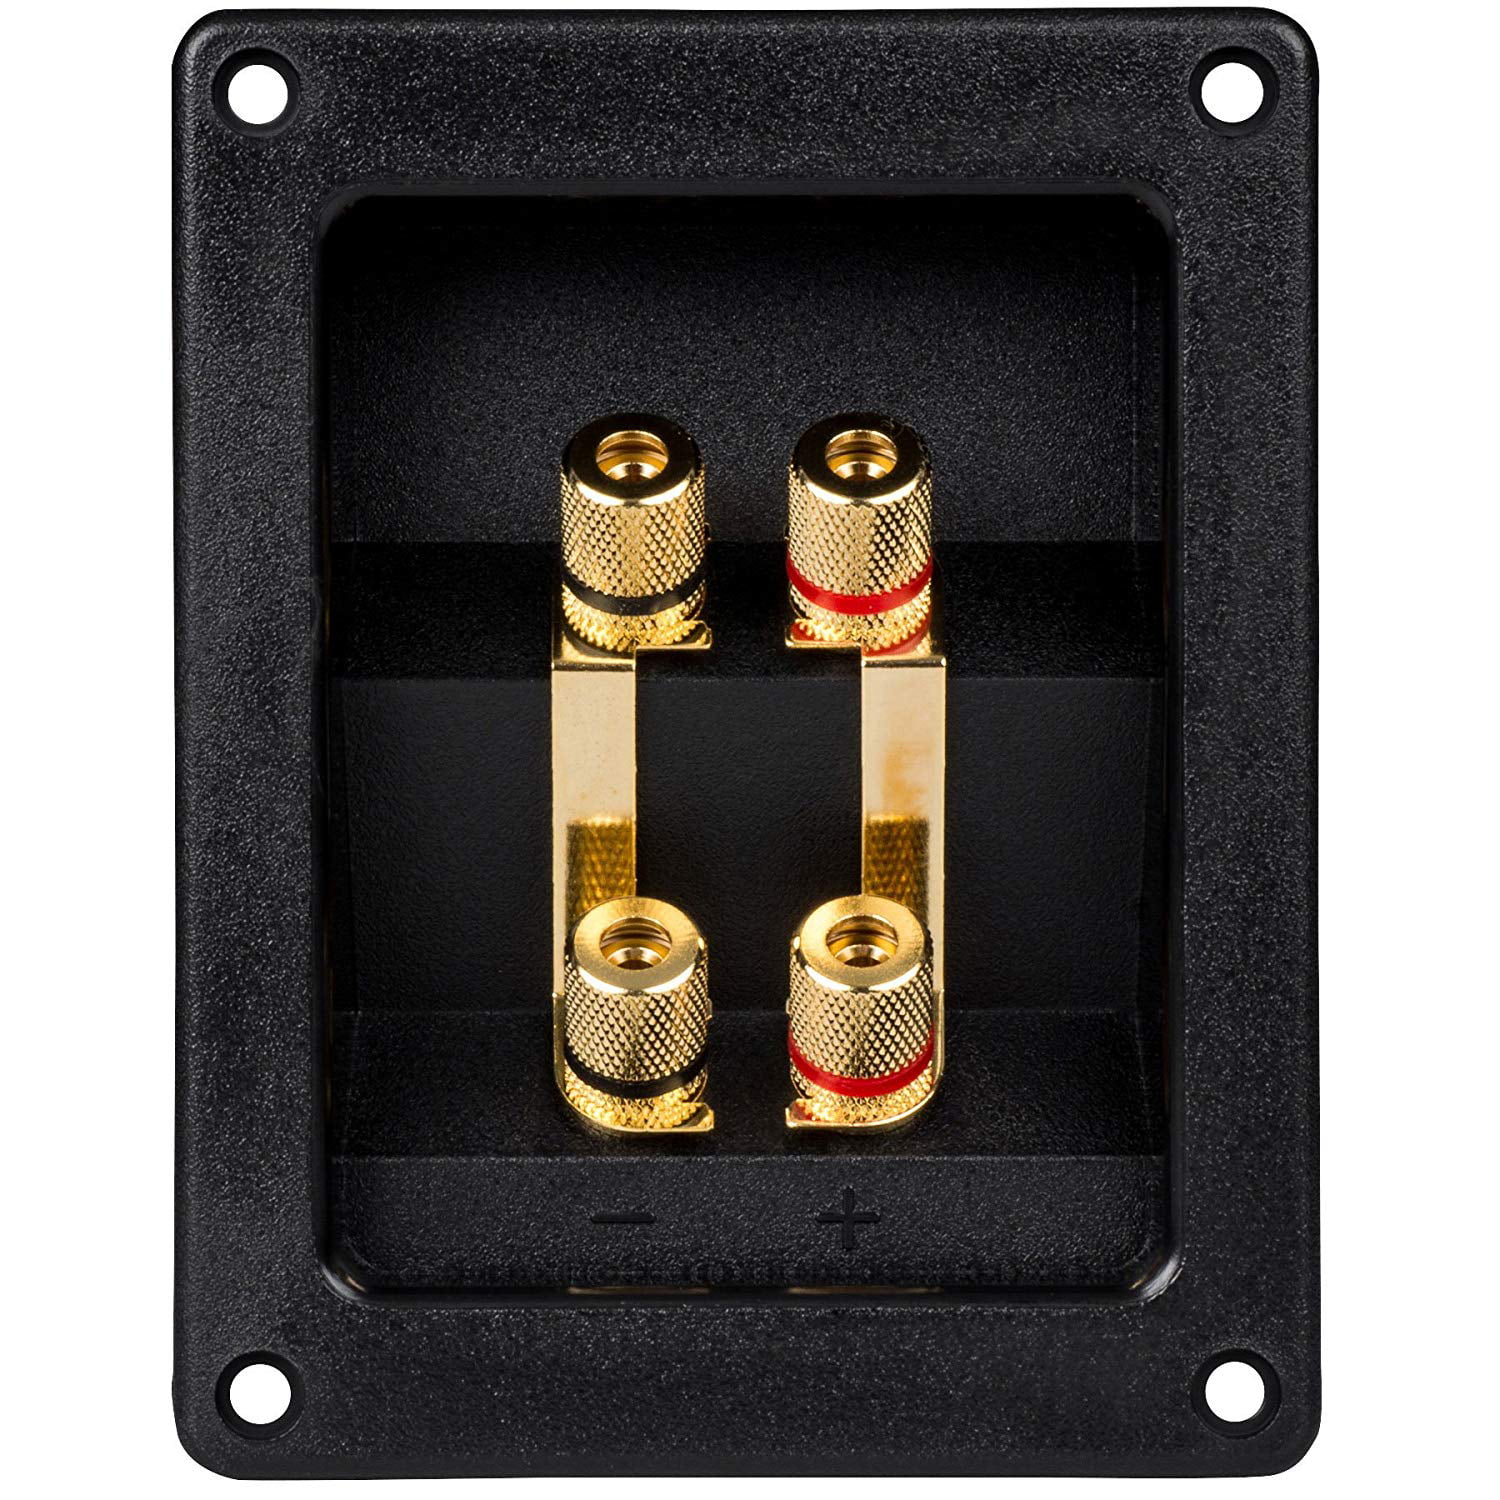 Jex Electronics Square Recessed Twin Speaker Quad 4X Gold Plated Terminal Solid Metal Binding Post Plate for sub-woofer